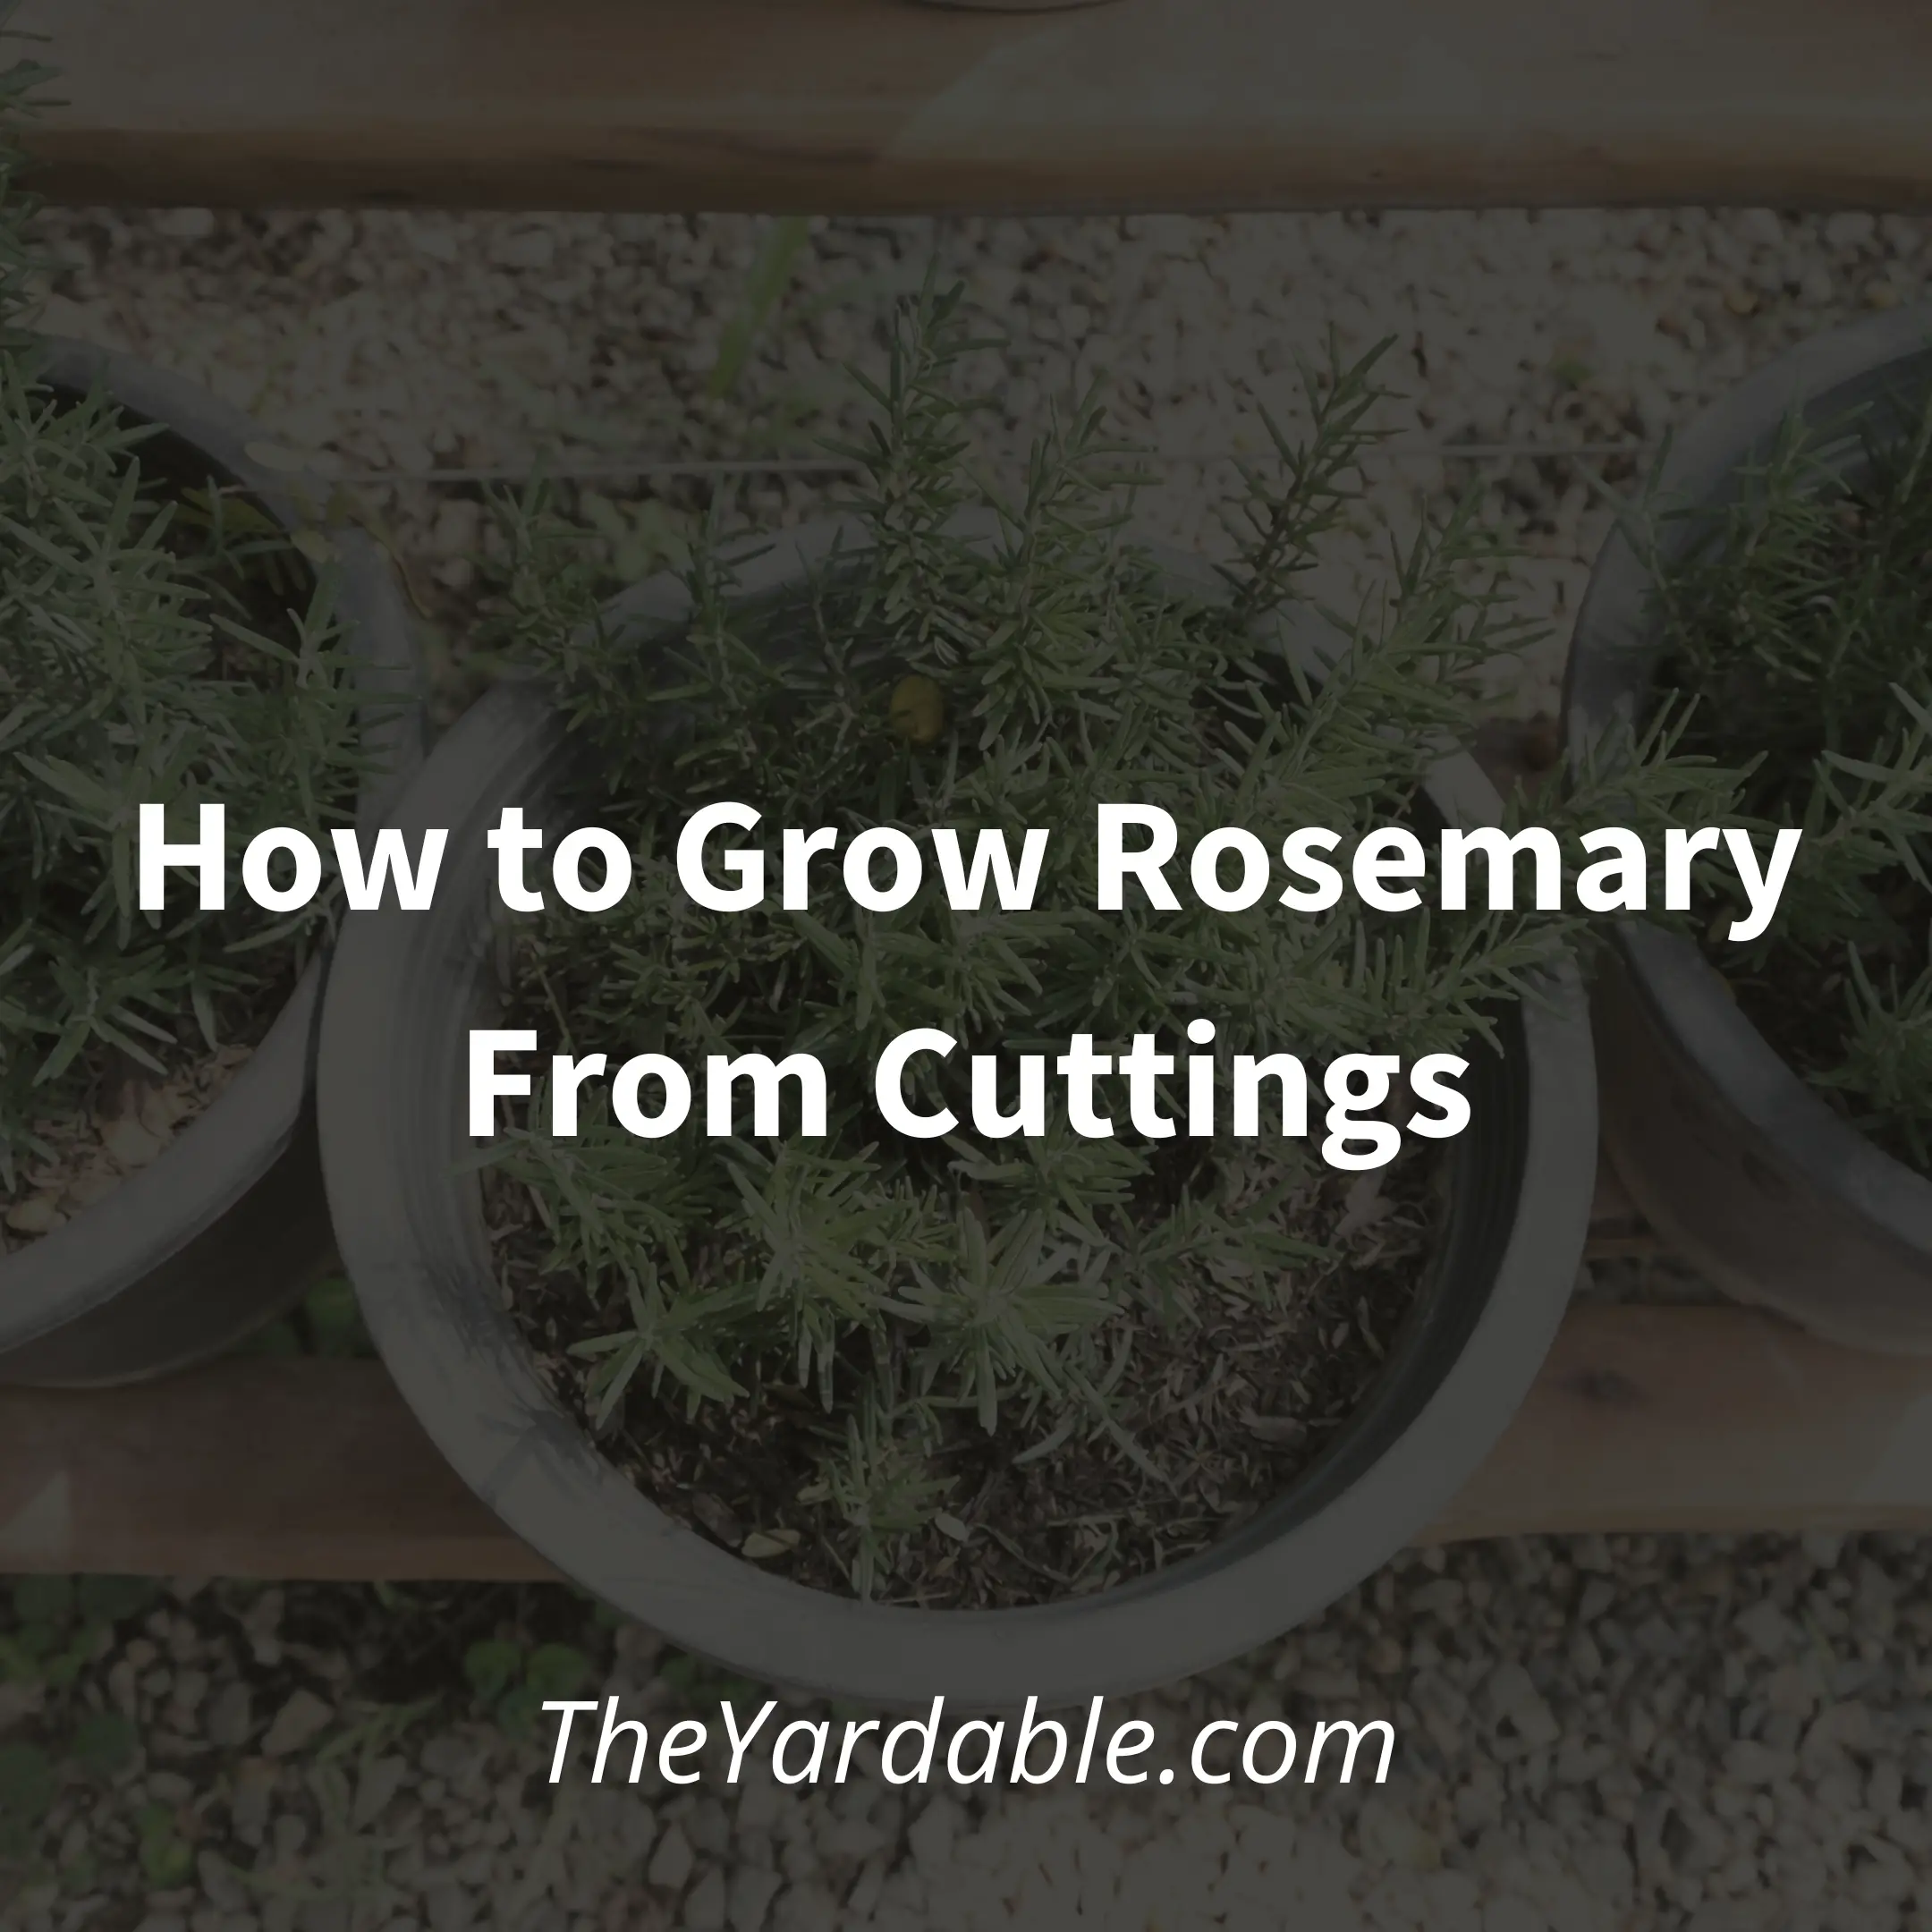 How to Grow Rosemary From Cuttings – Propagate Rosemary